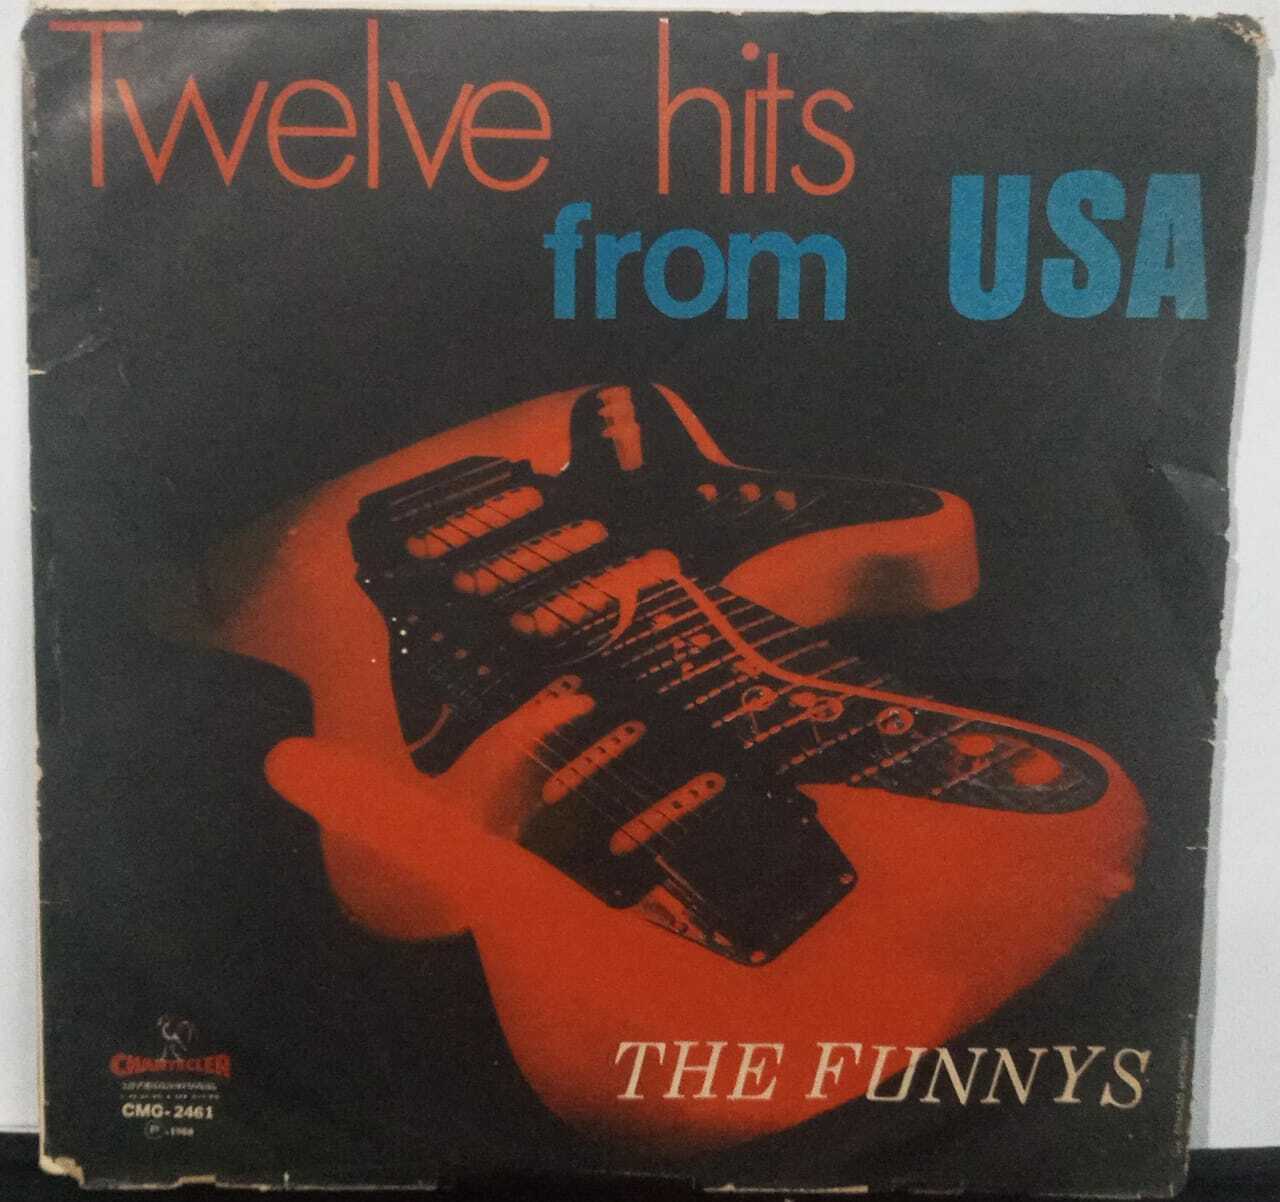 Vinil - Funnys The  - Twelve Hits From USA